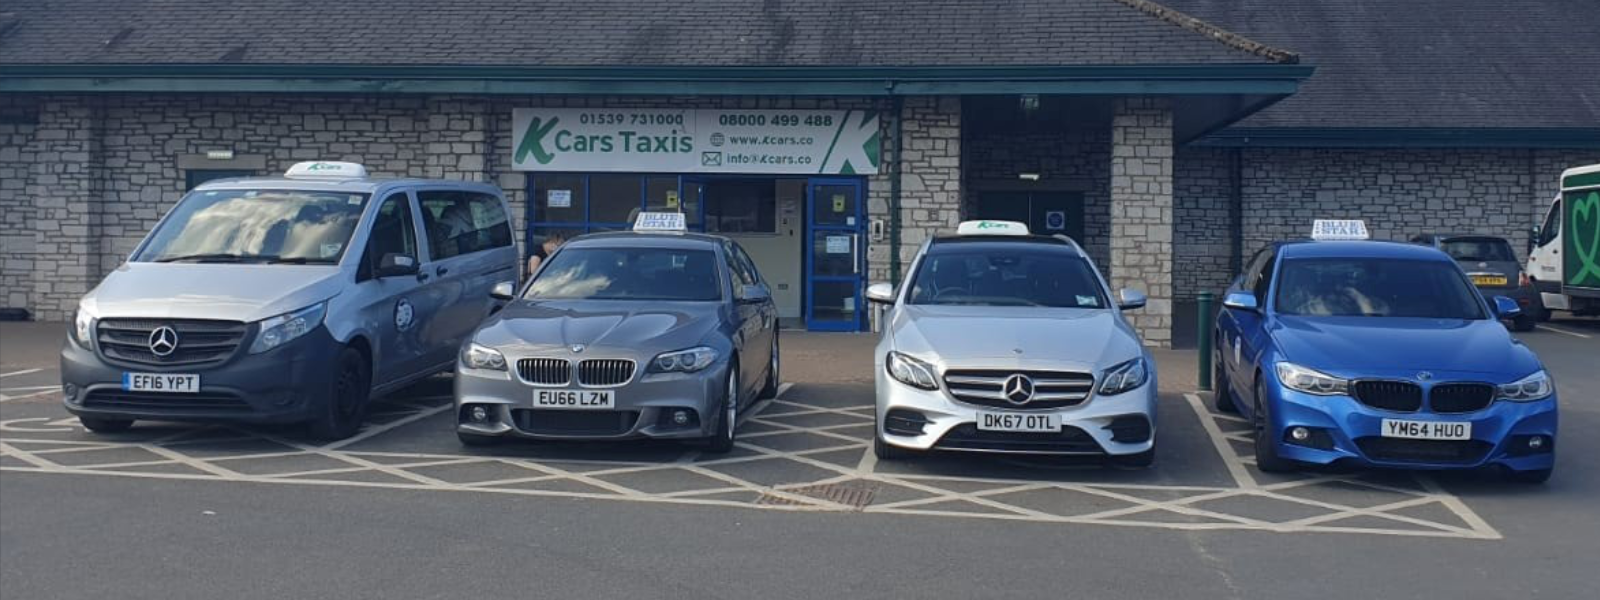 Welcome to Blue Star Taxis